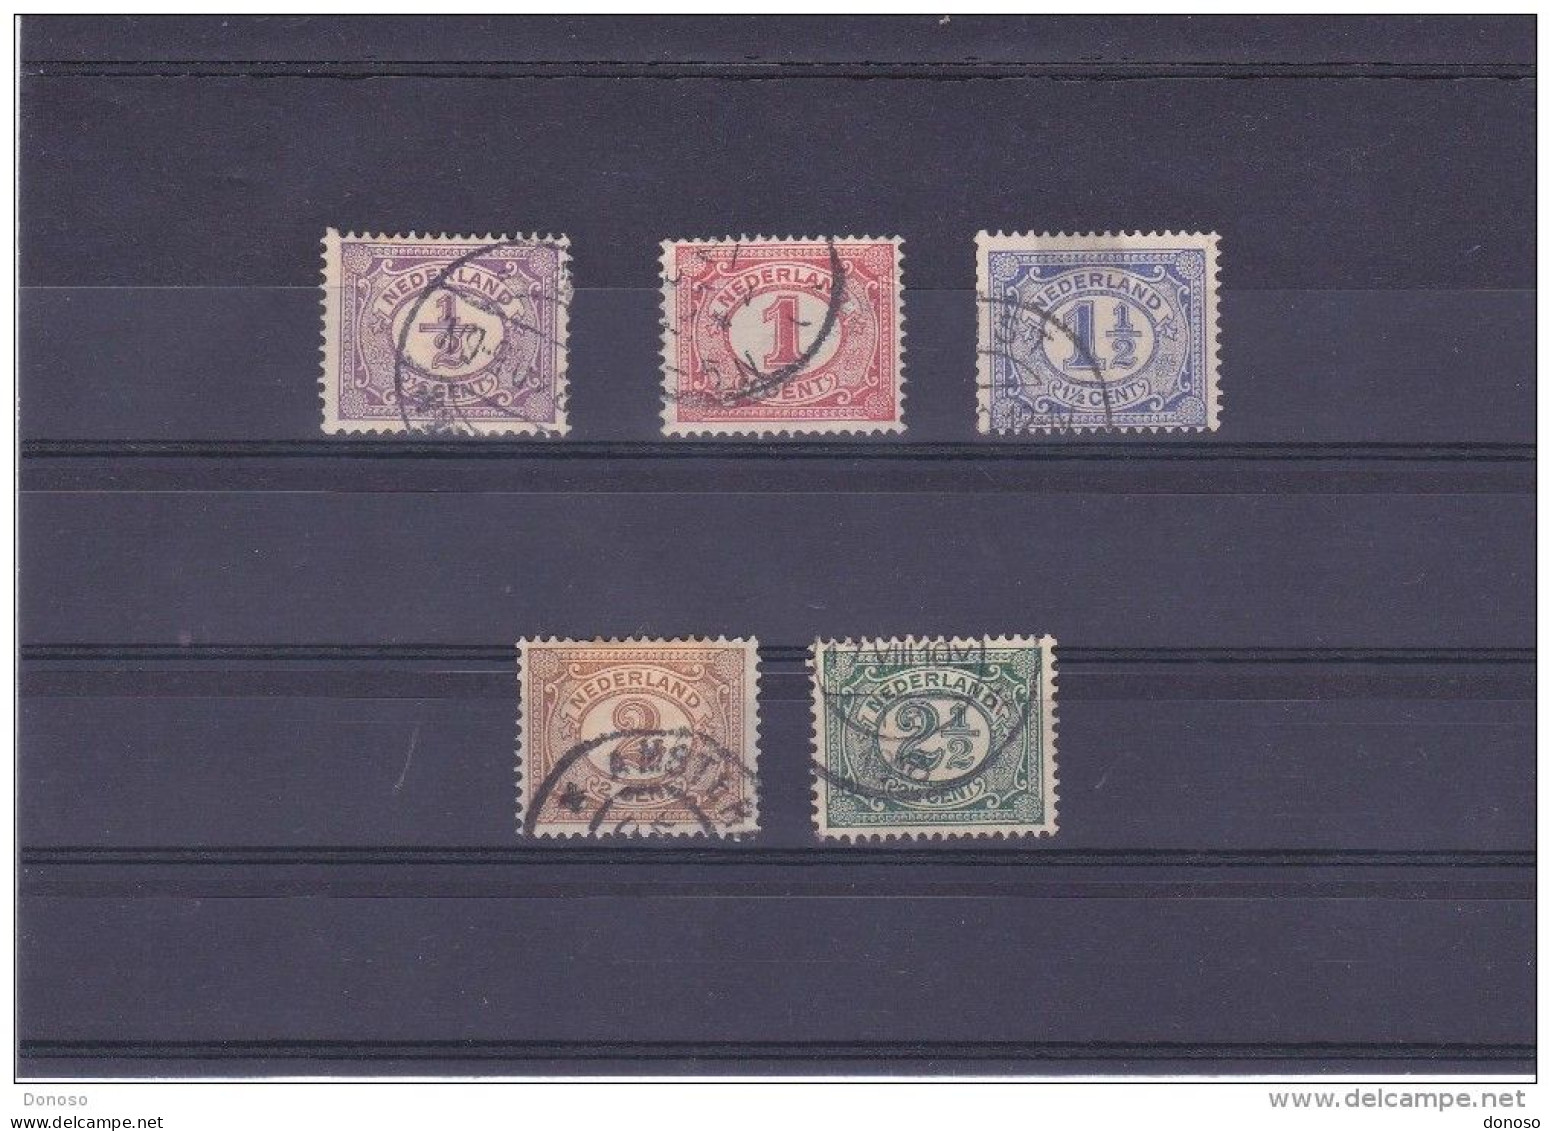 PAYS BAS 1899 Yvert 65-69 Oblitéré, Used  Cote : 1.60 Euros - Used Stamps